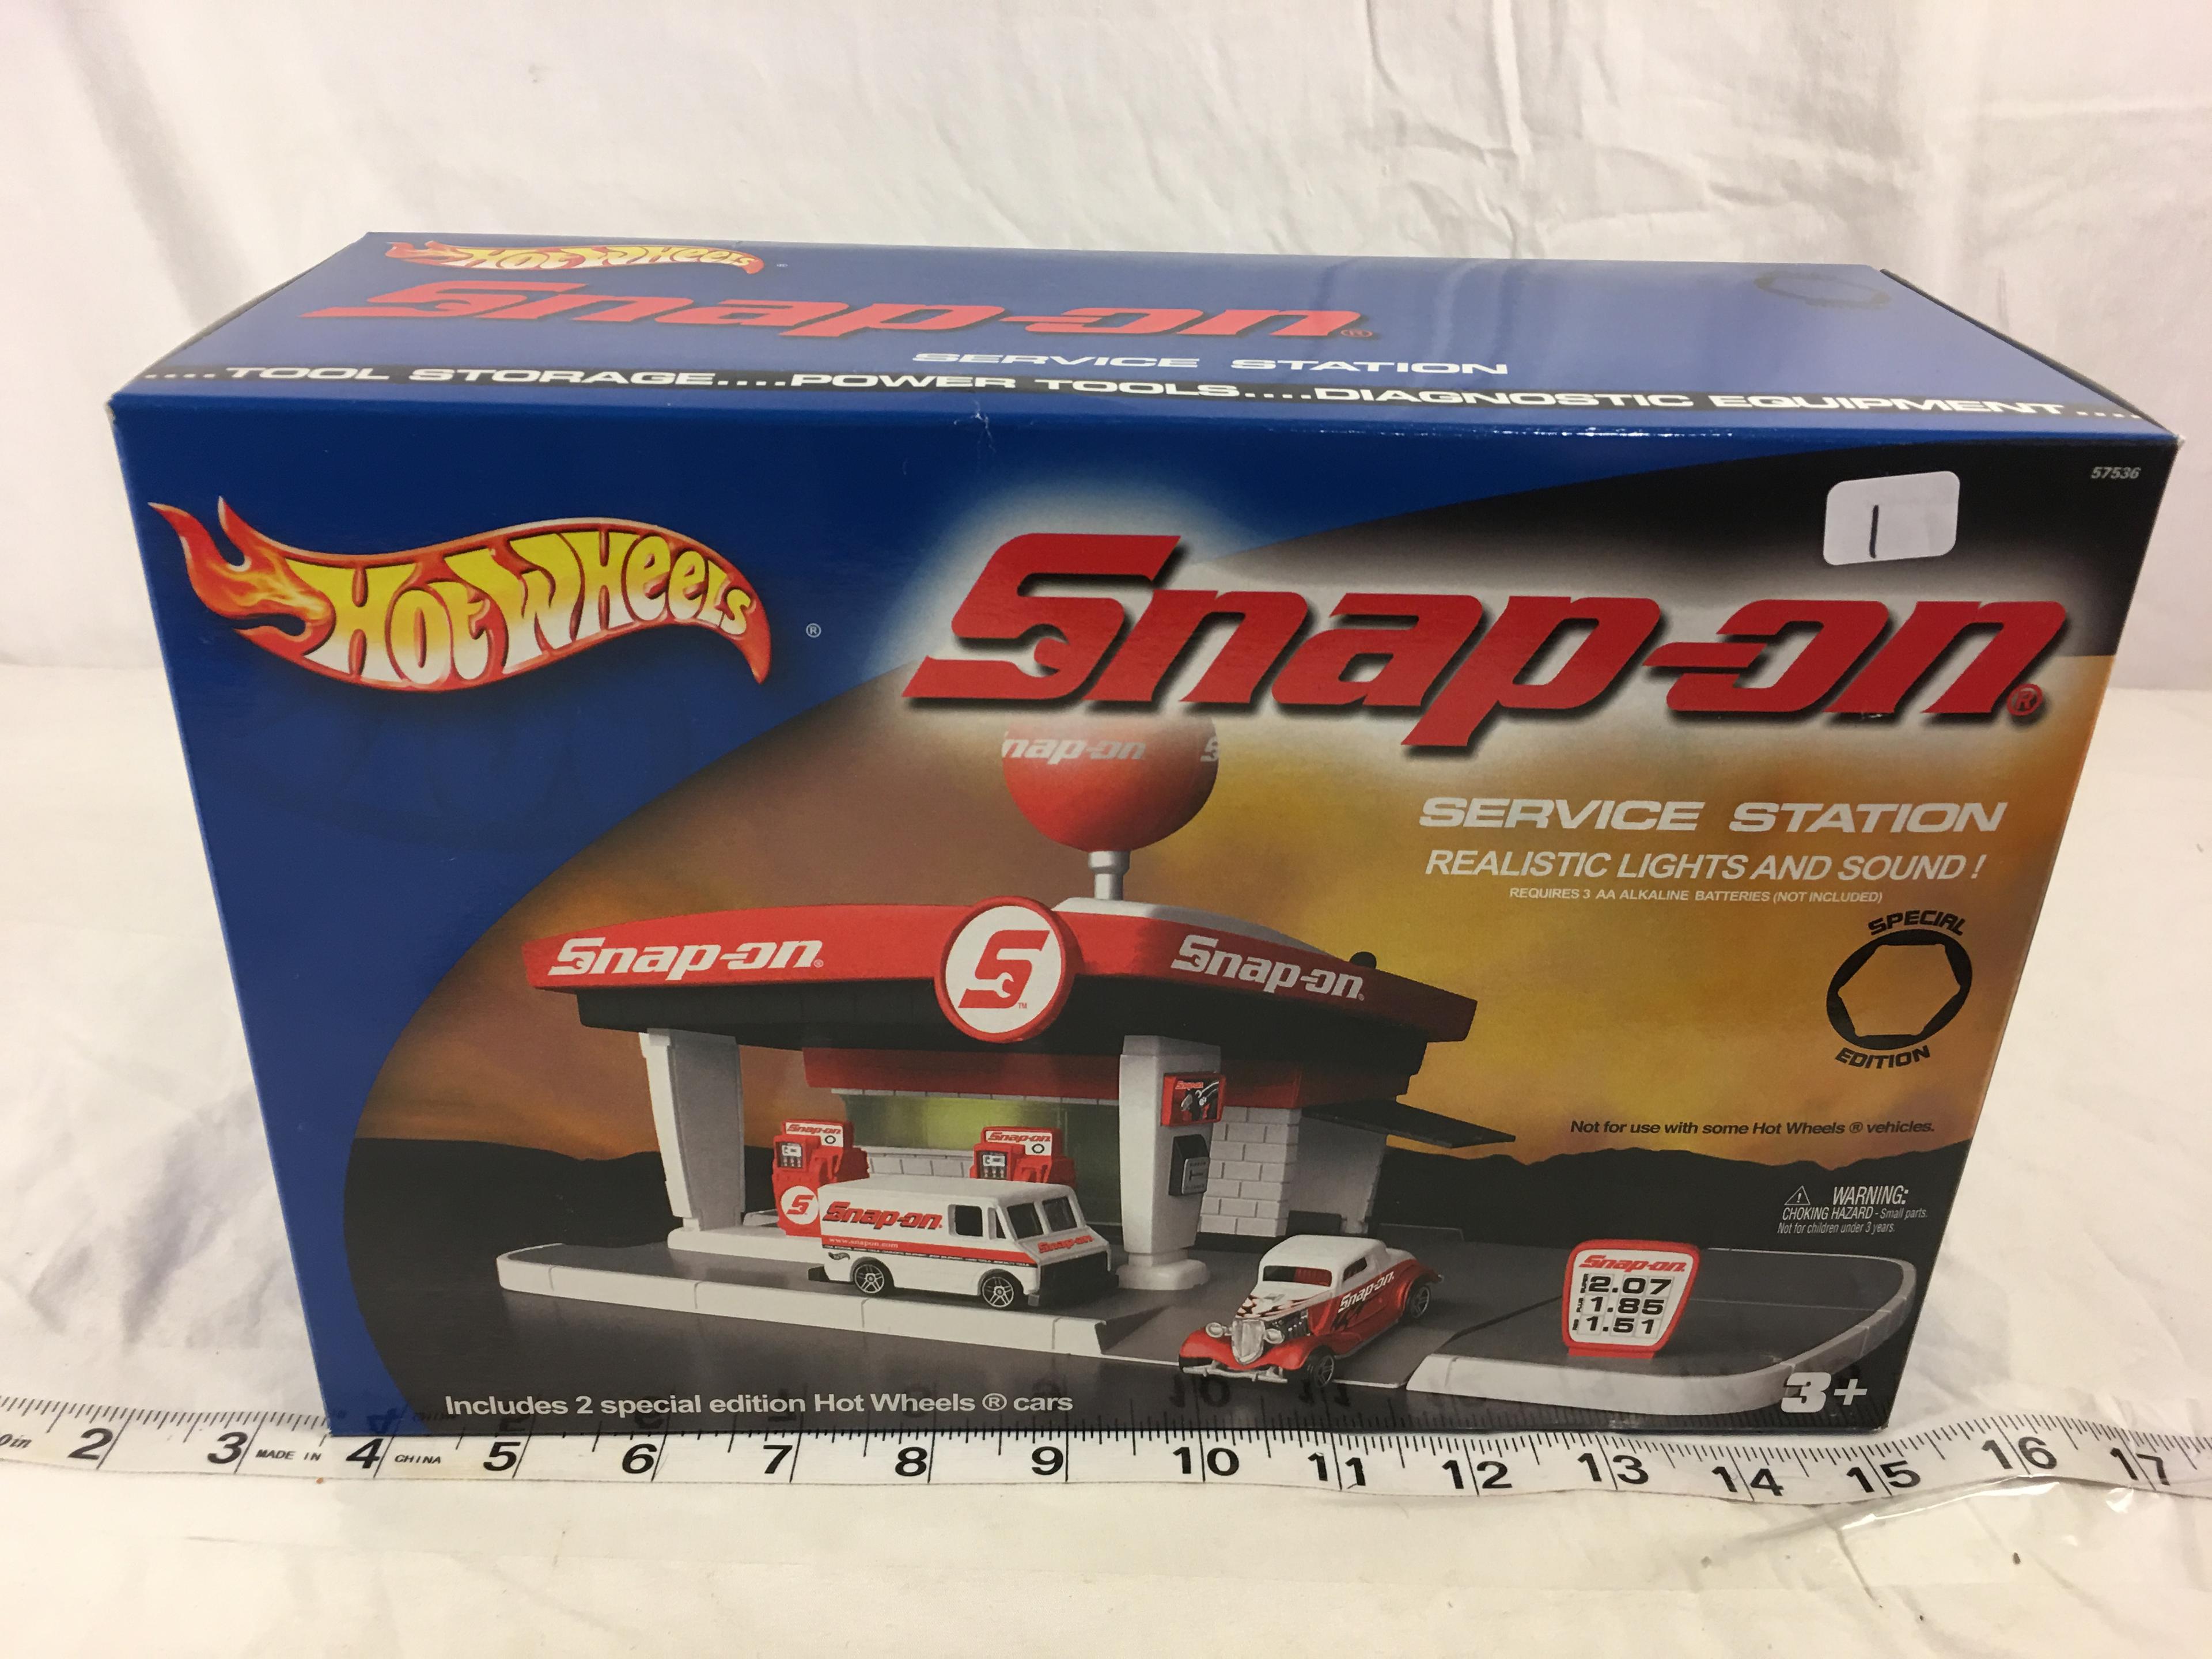 NIP Collector Hot wheels Snap-on Service Station Realistic Lights and Sound Box Sz:12x8"